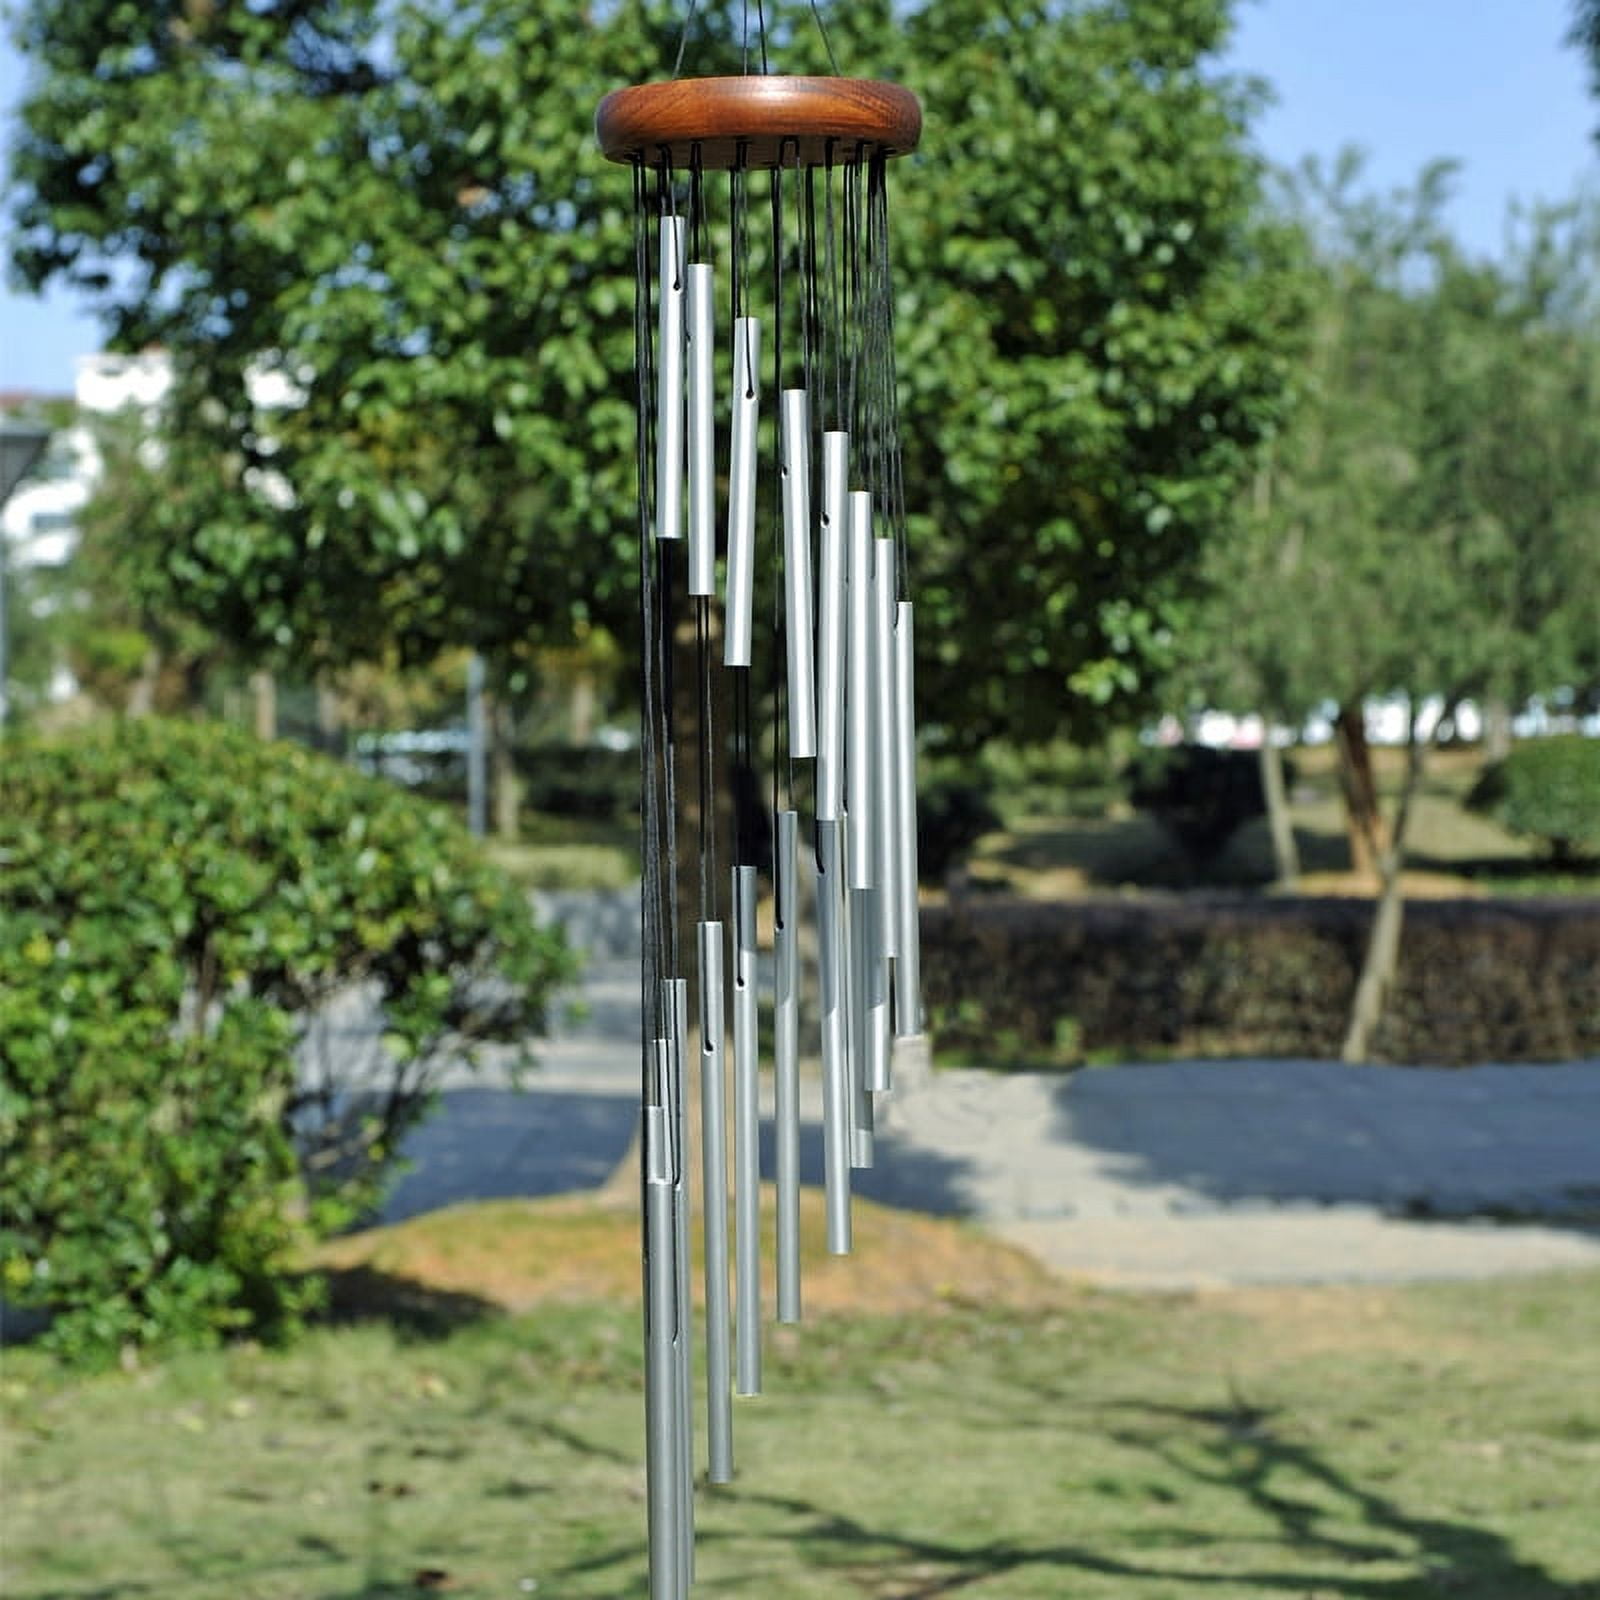 5 Sets Of 25pcs Wind Chime Tubes Wind Chime Repair Tube Wind Chime Parts